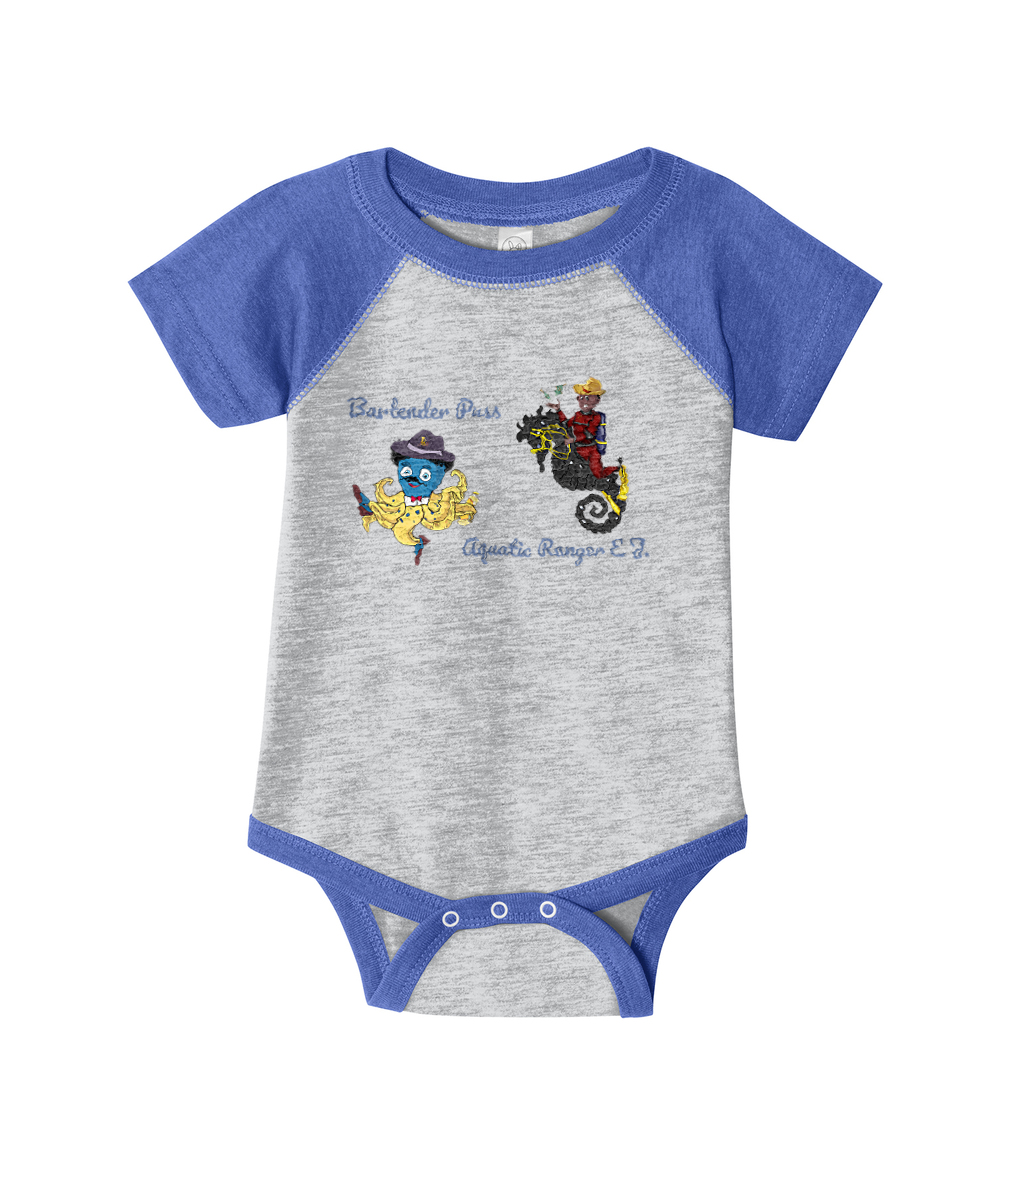 Sea Adventures Baby™ Embroidered Infant Baseball Fine Jersey Bodysuit or Similar